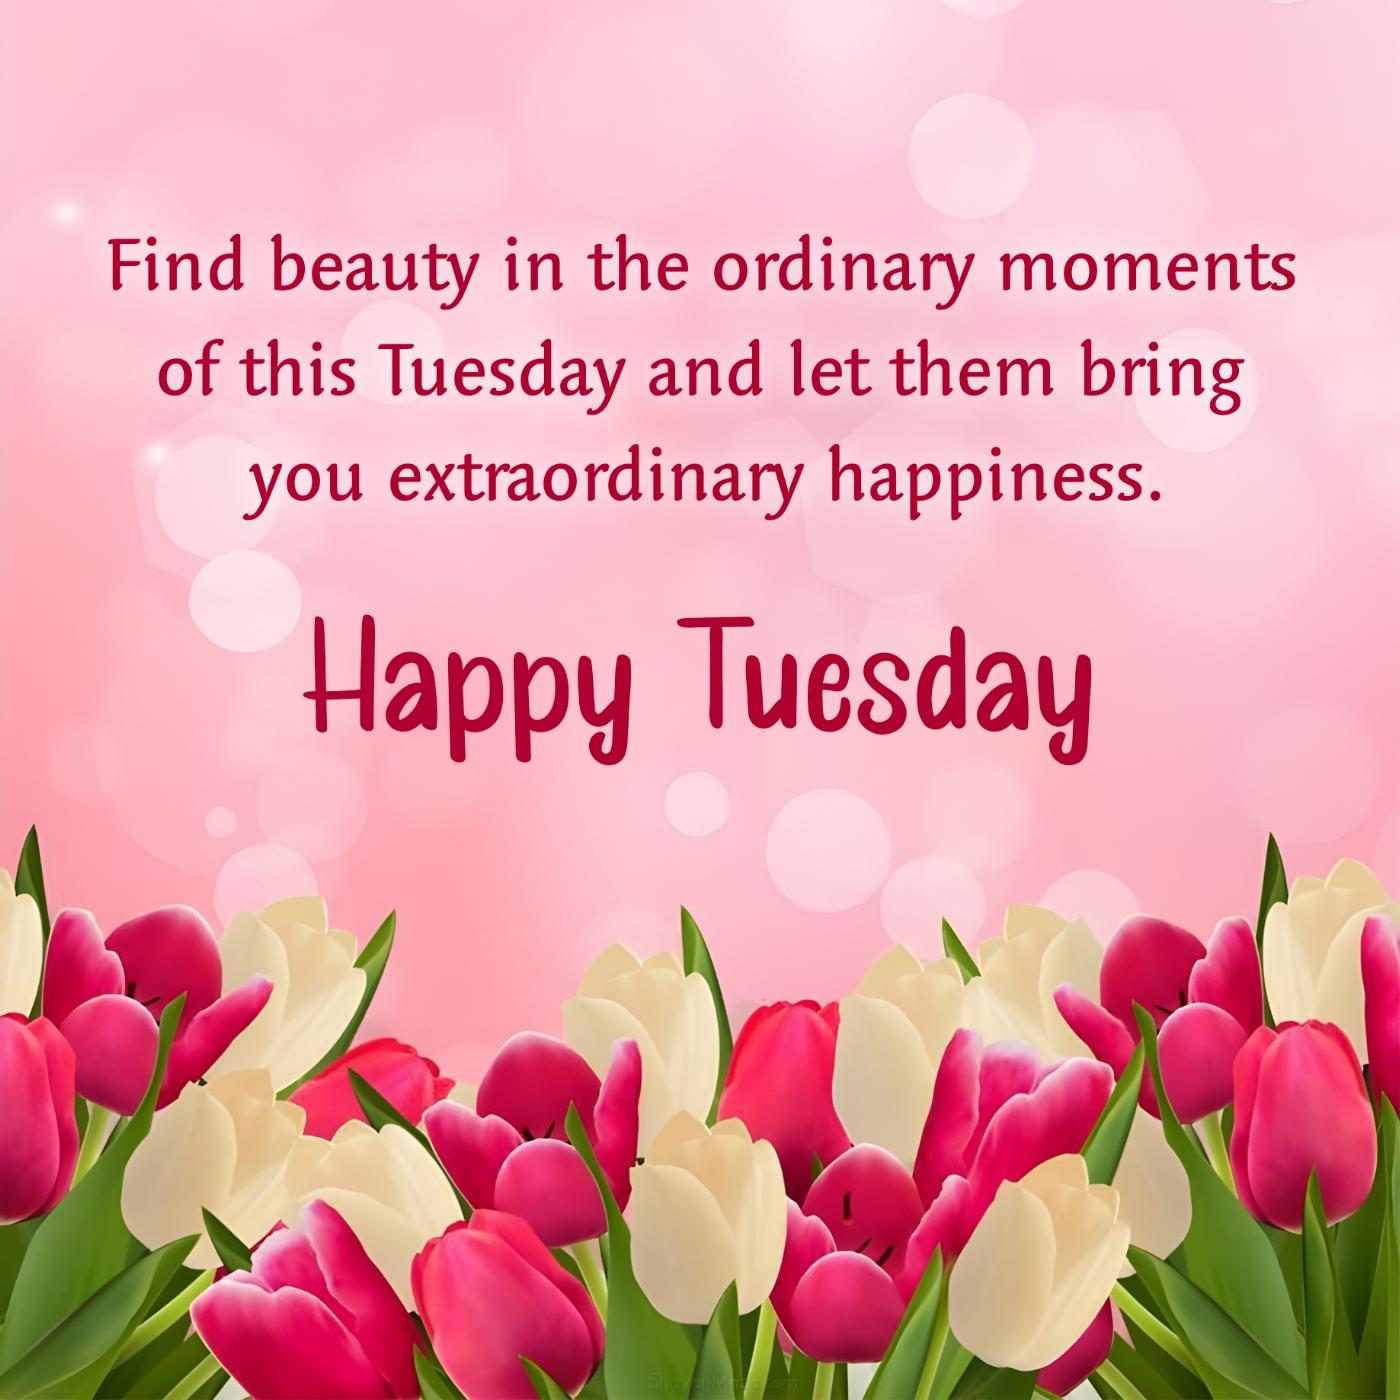 Find beauty in the ordinary moments of this Tuesday